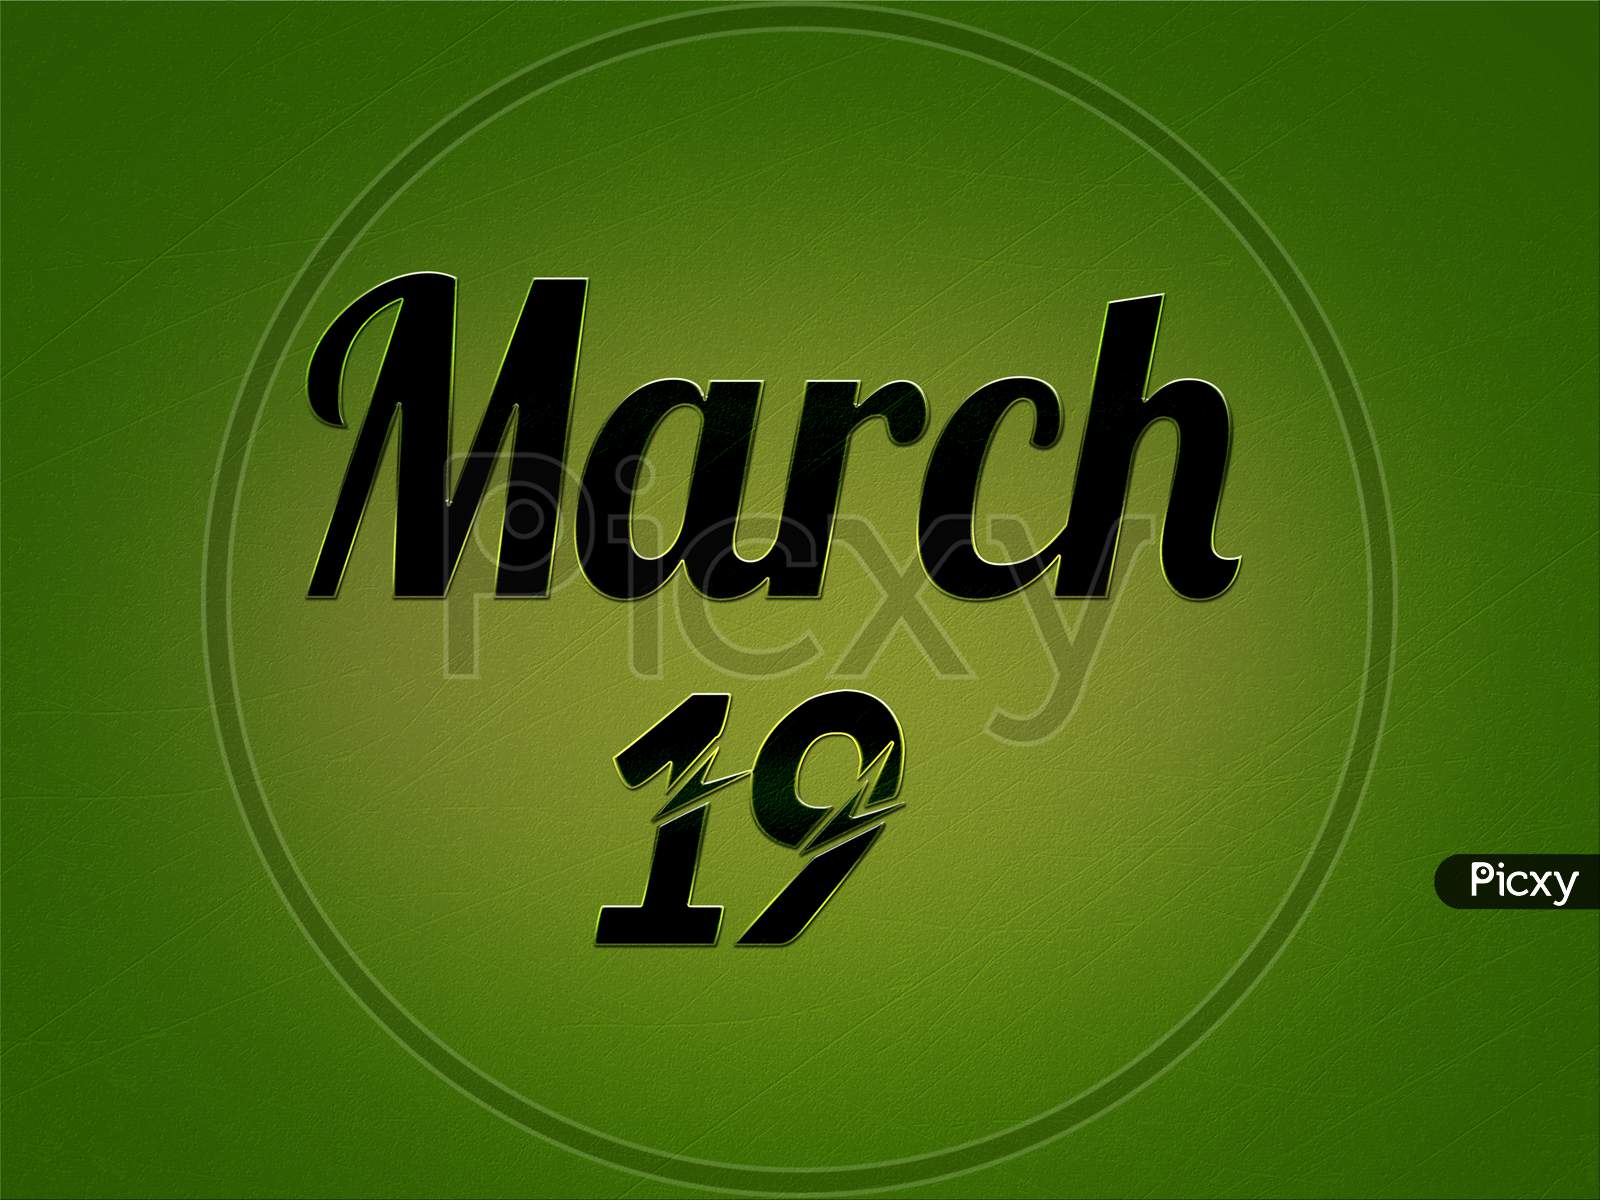 19 March, Monthly Calendar. Text Effect On Green Background